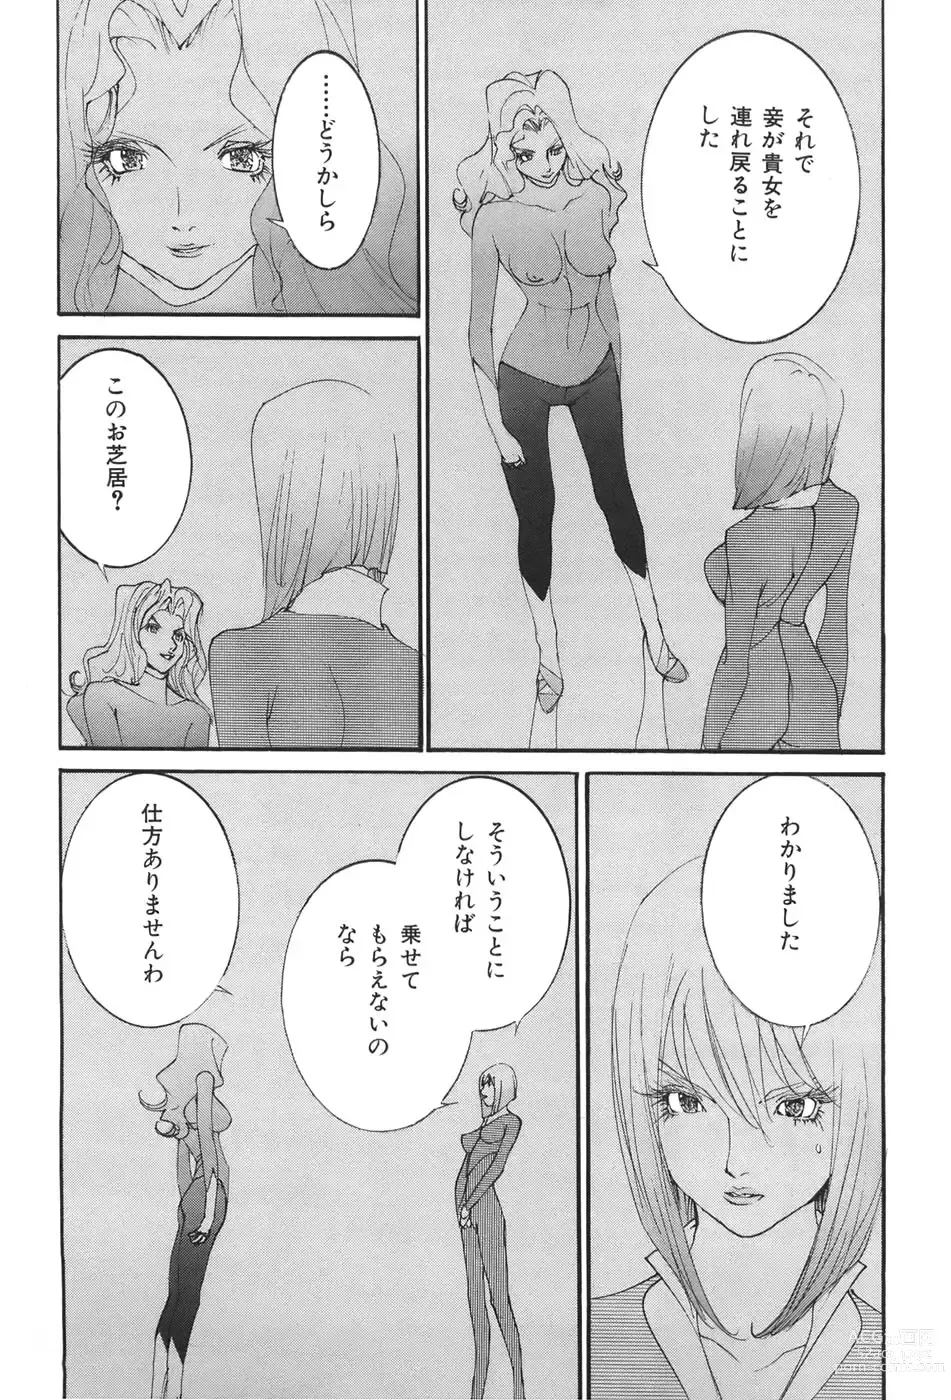 Page 23 of doujinshi Yapoo the human cattle vol.04